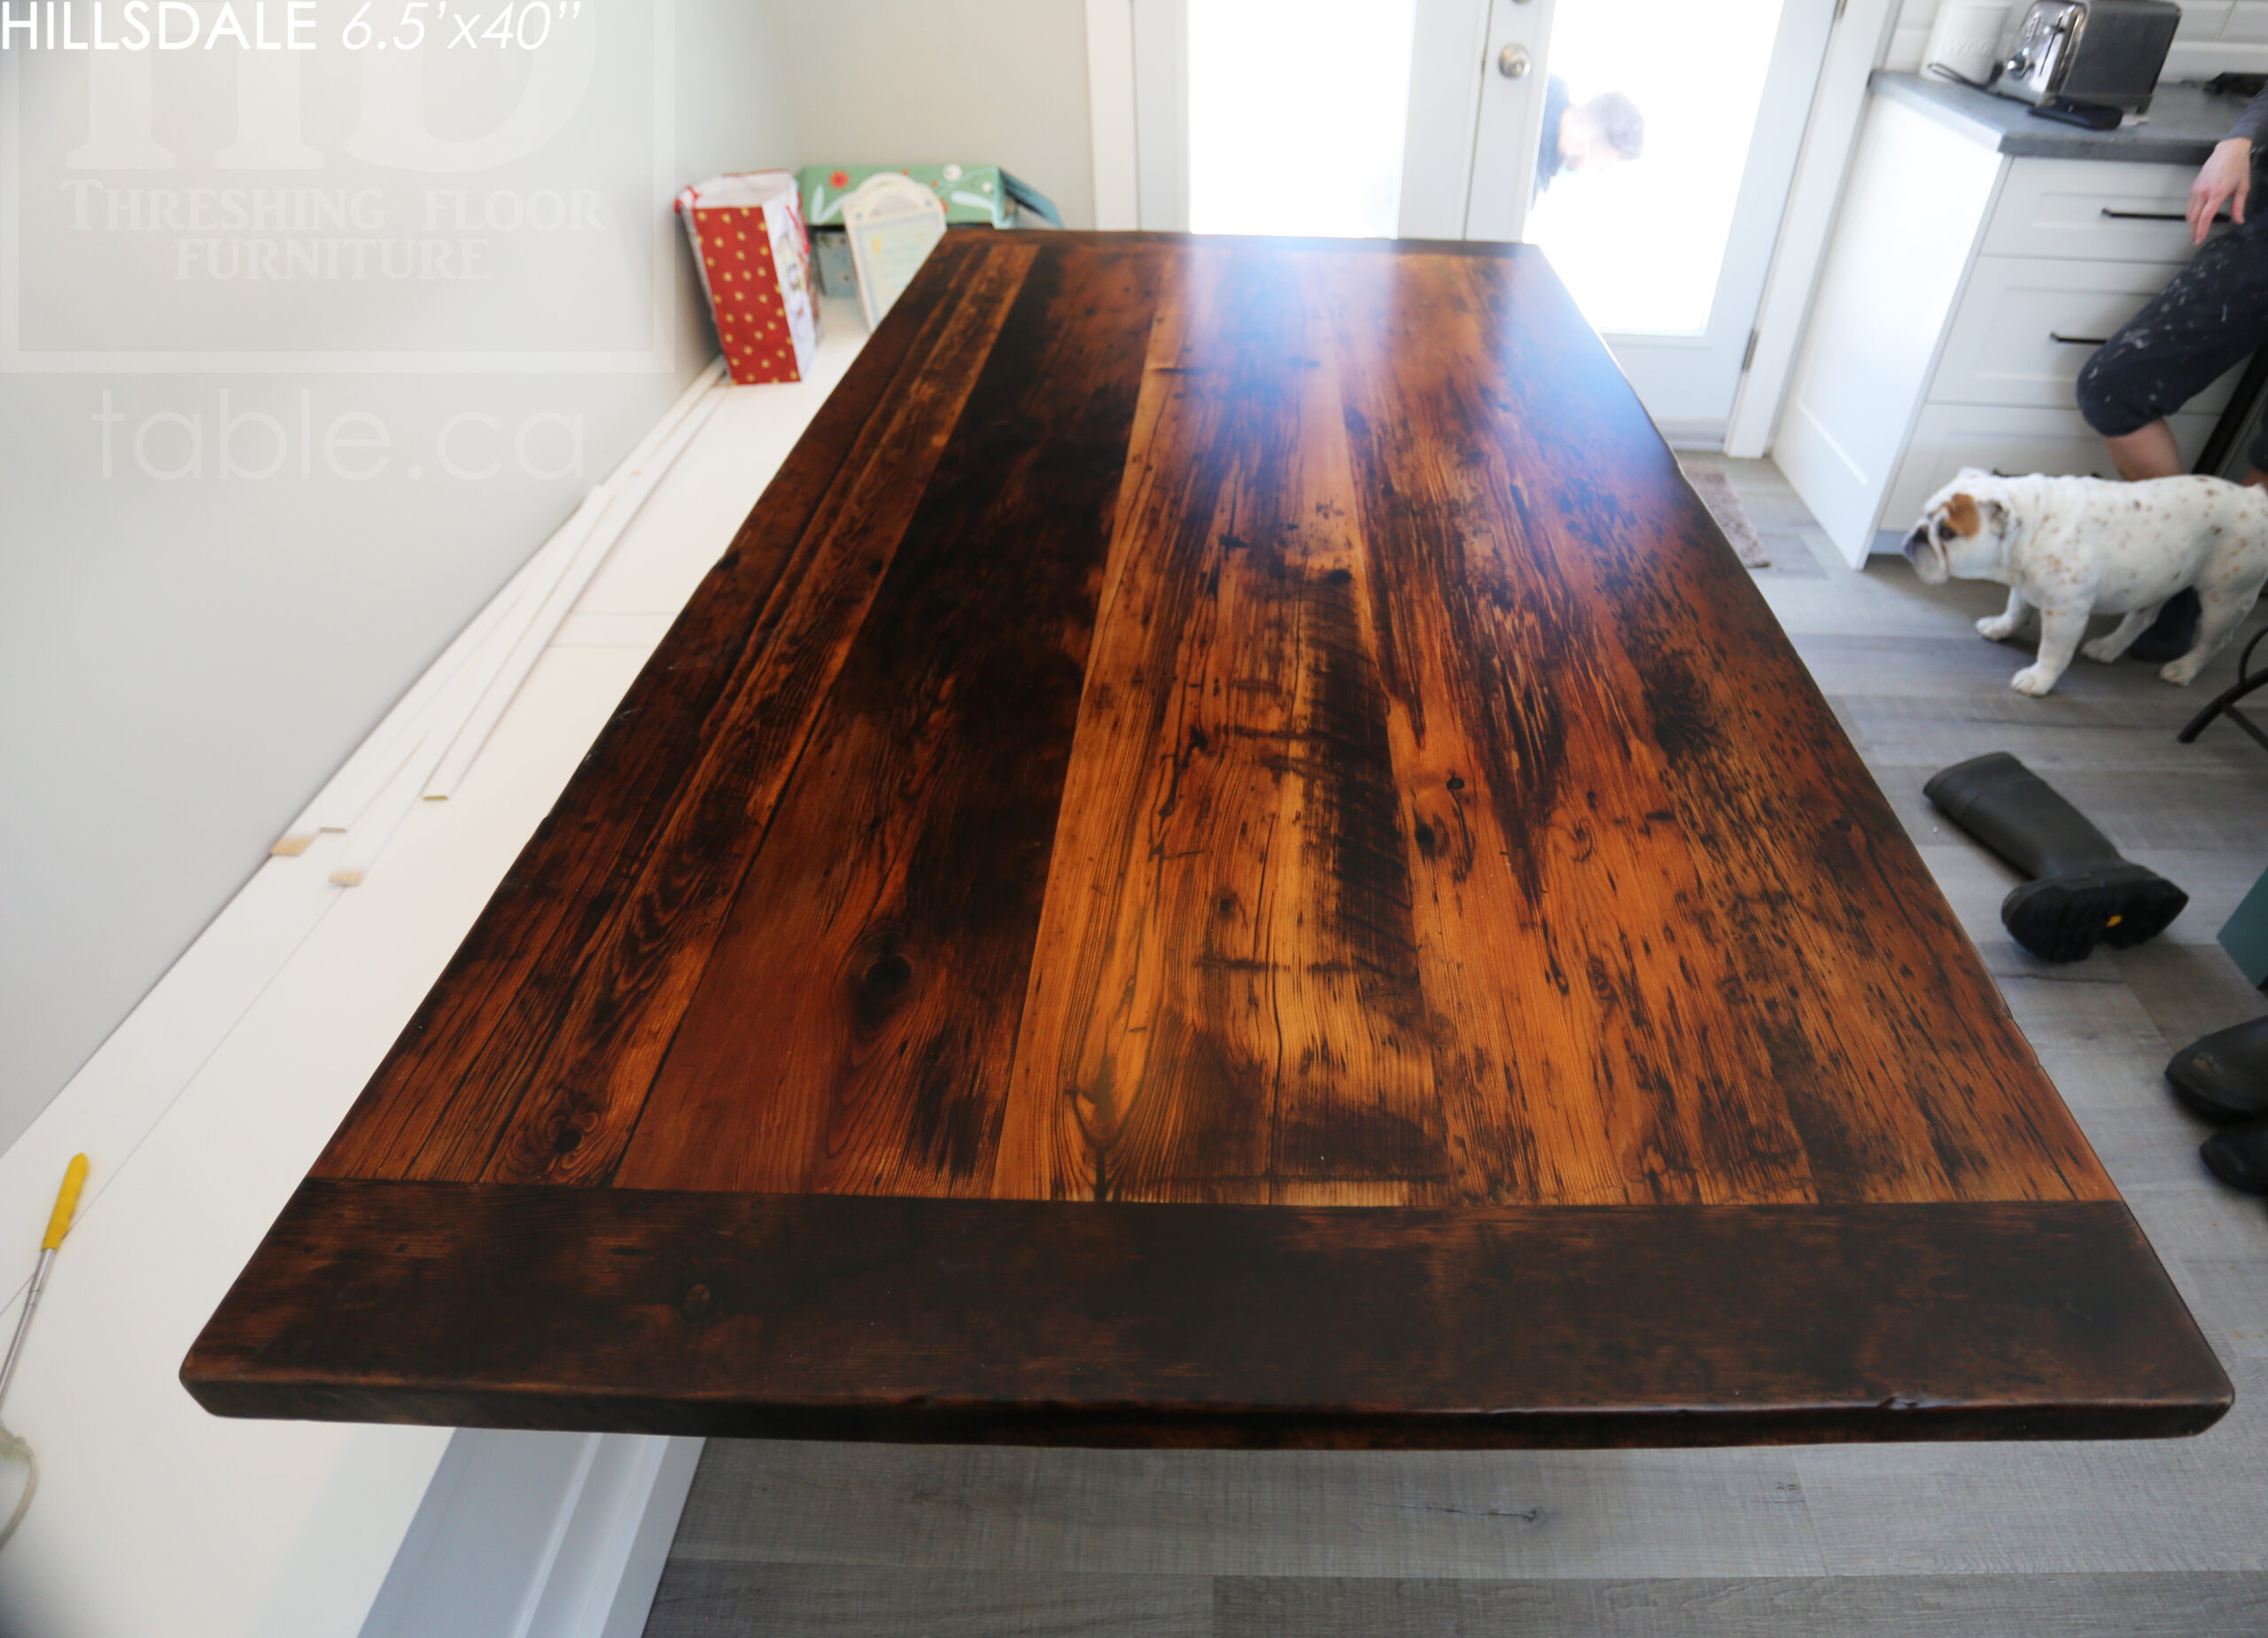 6.5' Reclaimed Wood Table for Hillsdale home - 40" wide - Sawbuck Base - Hemlock Ontario Barnwood Construction - Original edges & distressing maintained - Premium epoxy + matte polyurethane finish / www.table.ca